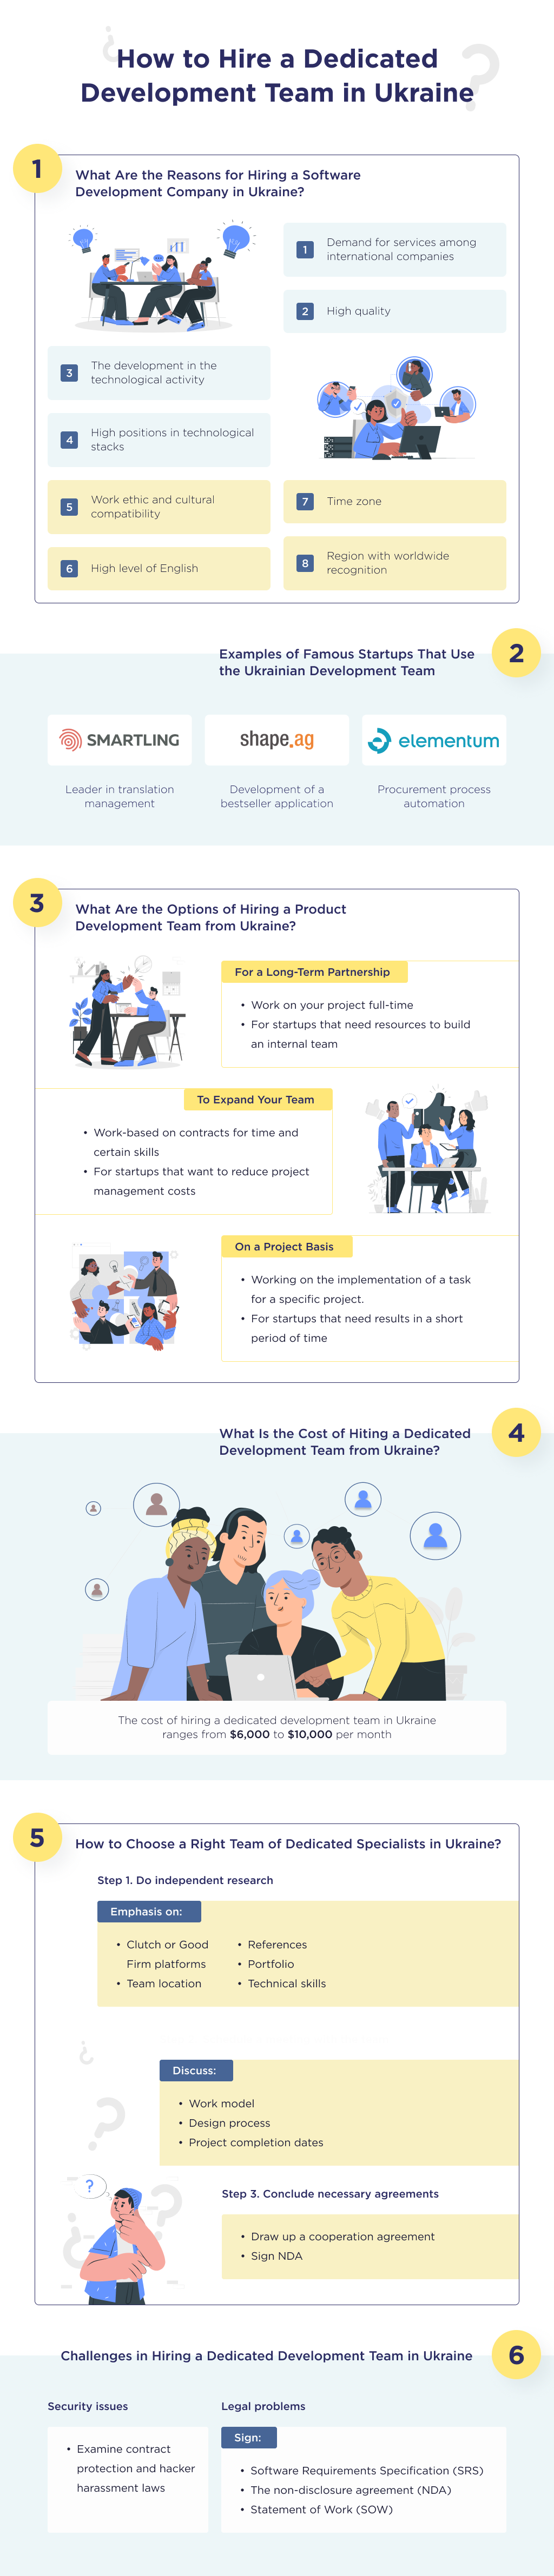 This infographic describes the detailed process of how to hire a dedicated development team in Ukraine with the main reasons and benefits